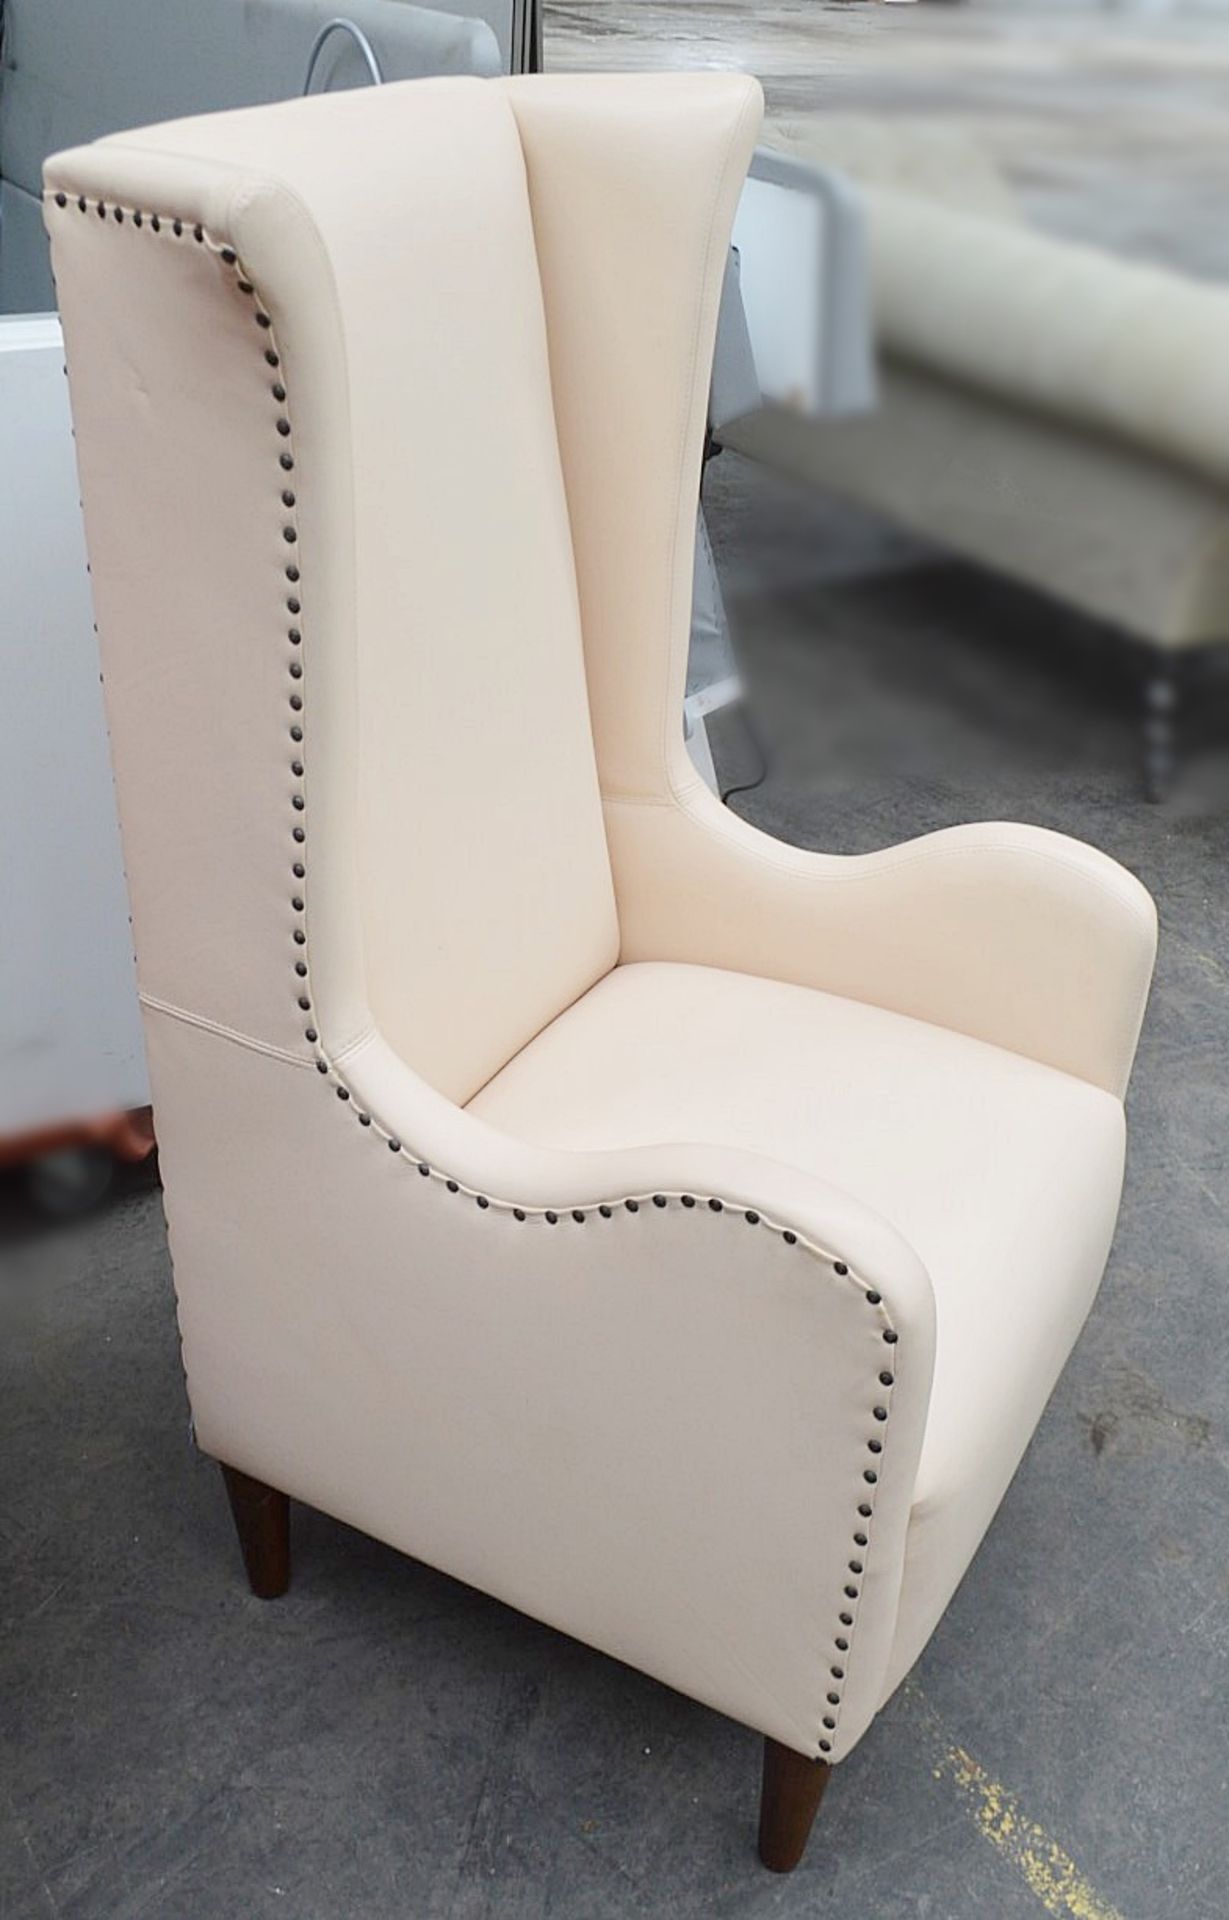 1 x Large Commercial Wing-Back Armchair In A Peach Leather With Studded Detailing - Professionally - Image 7 of 7